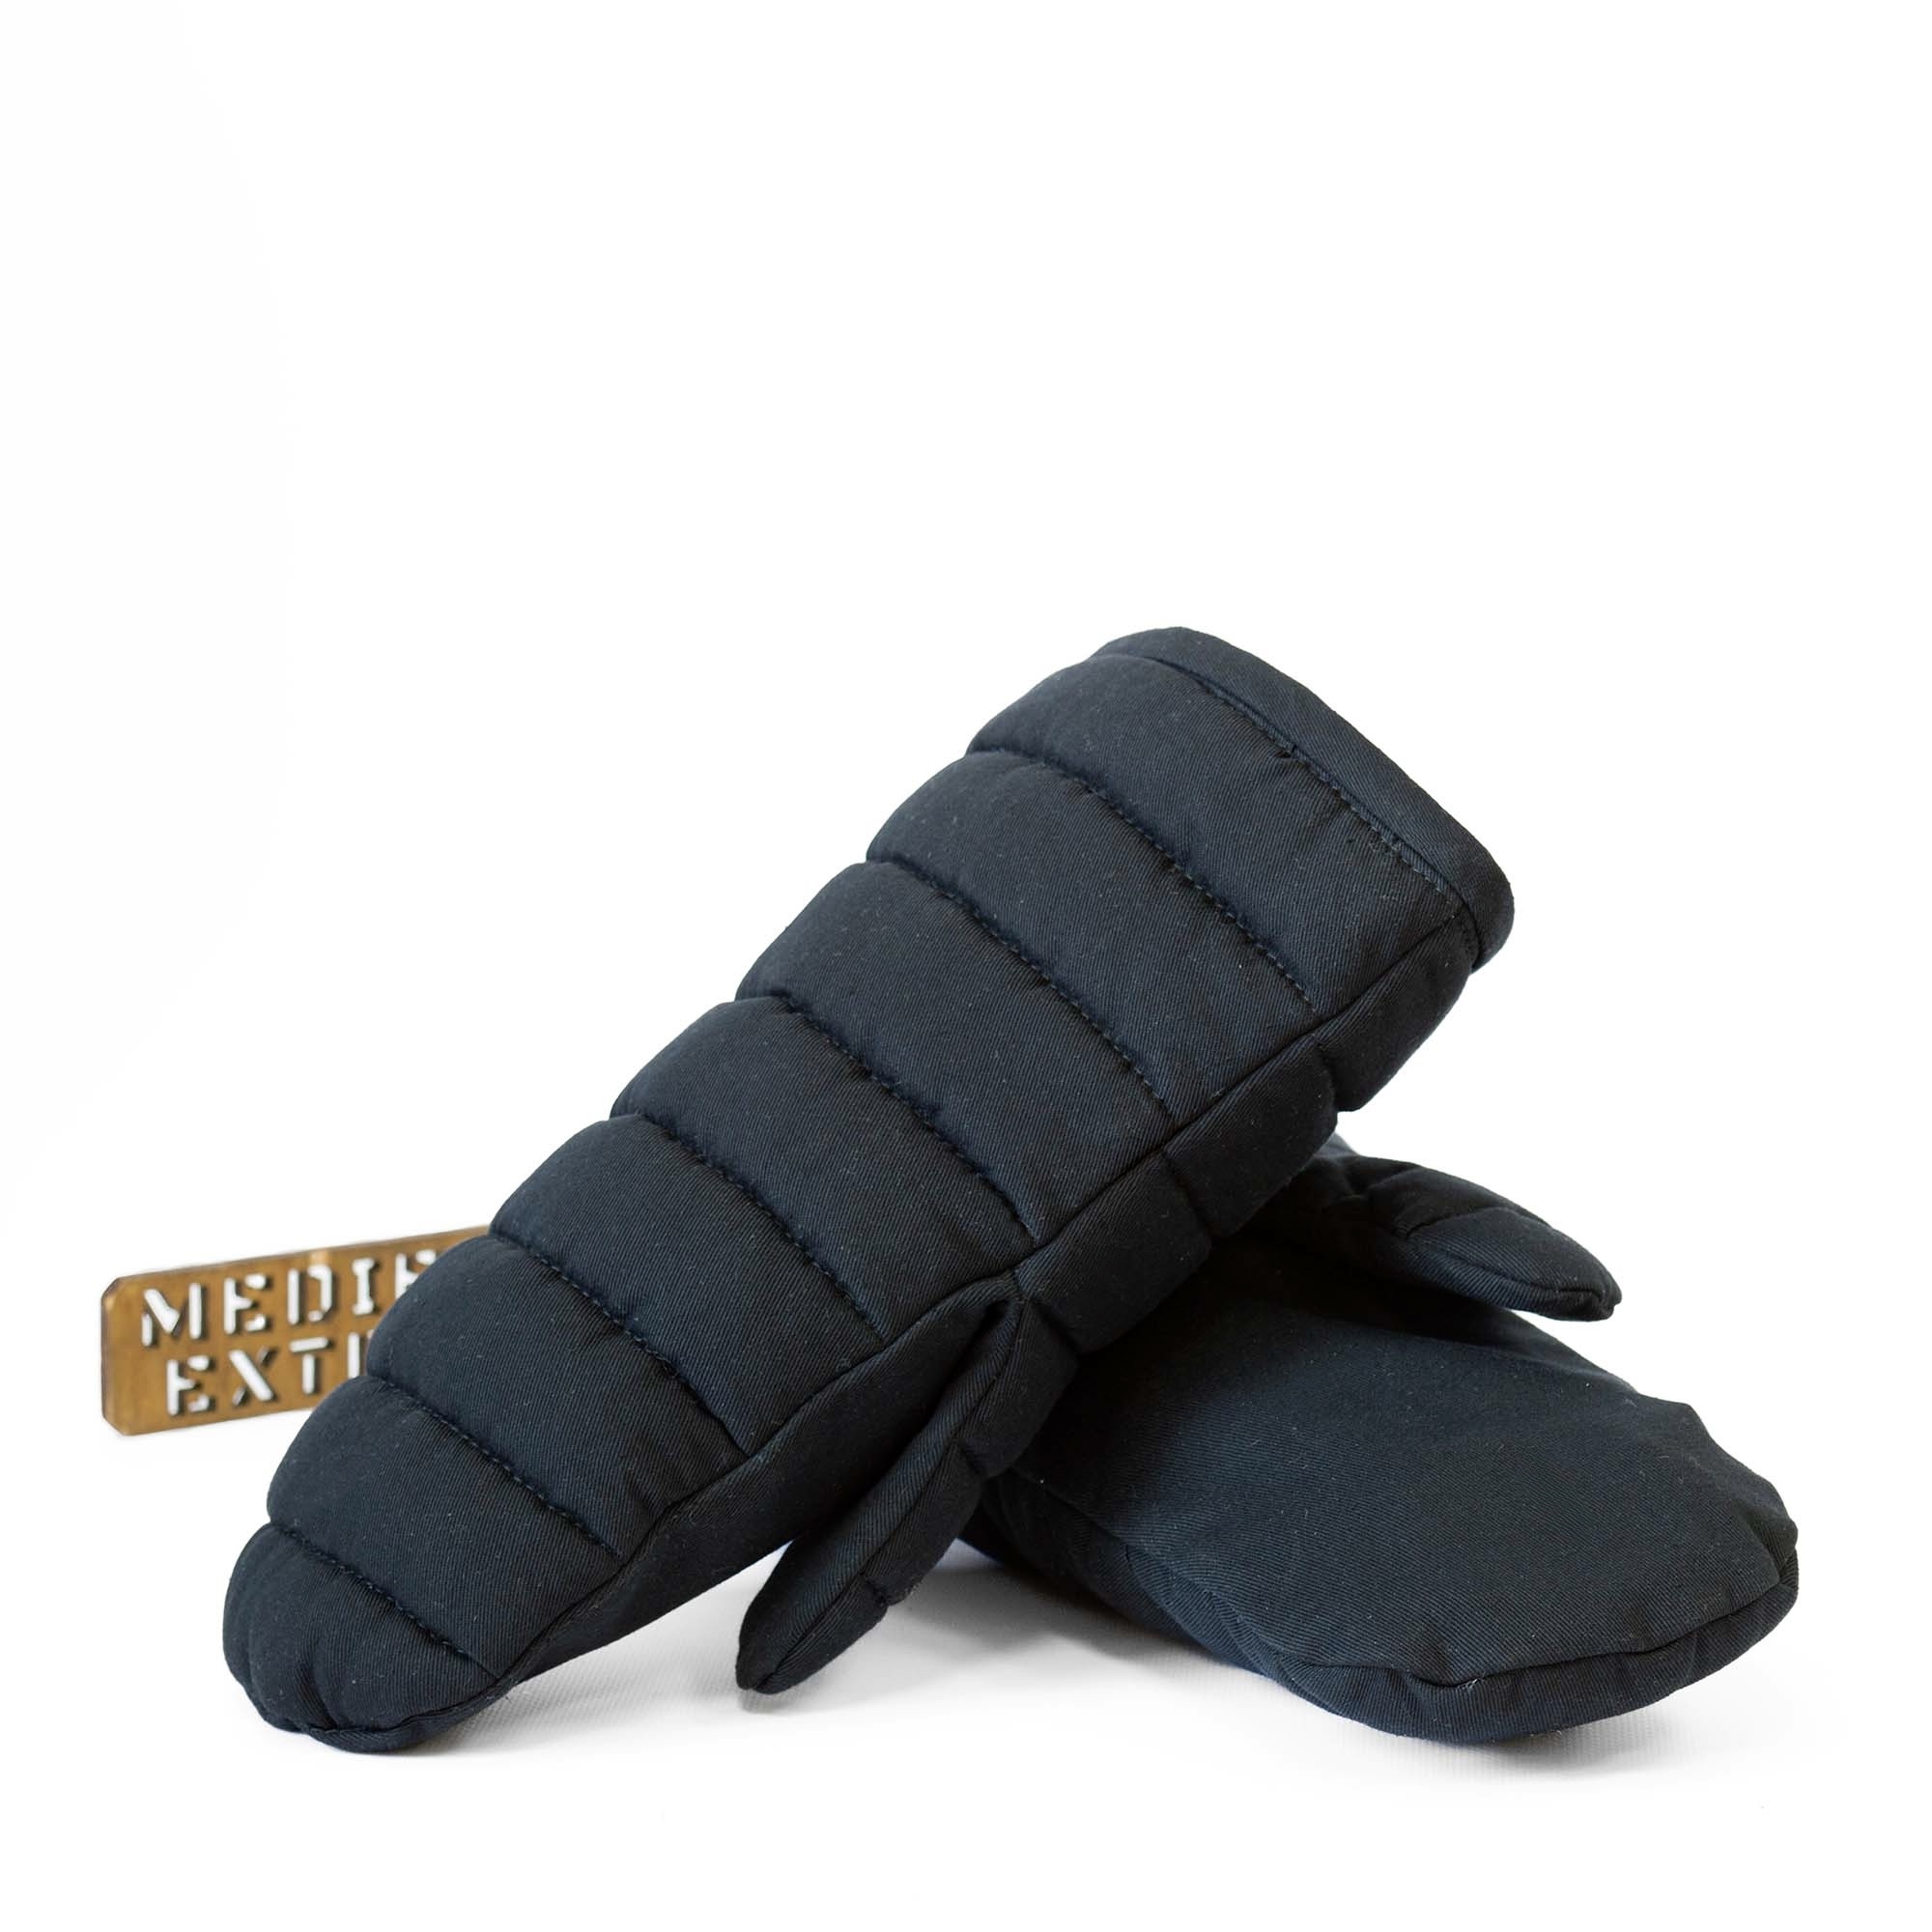 Padded Mittens for Armored Combat pair